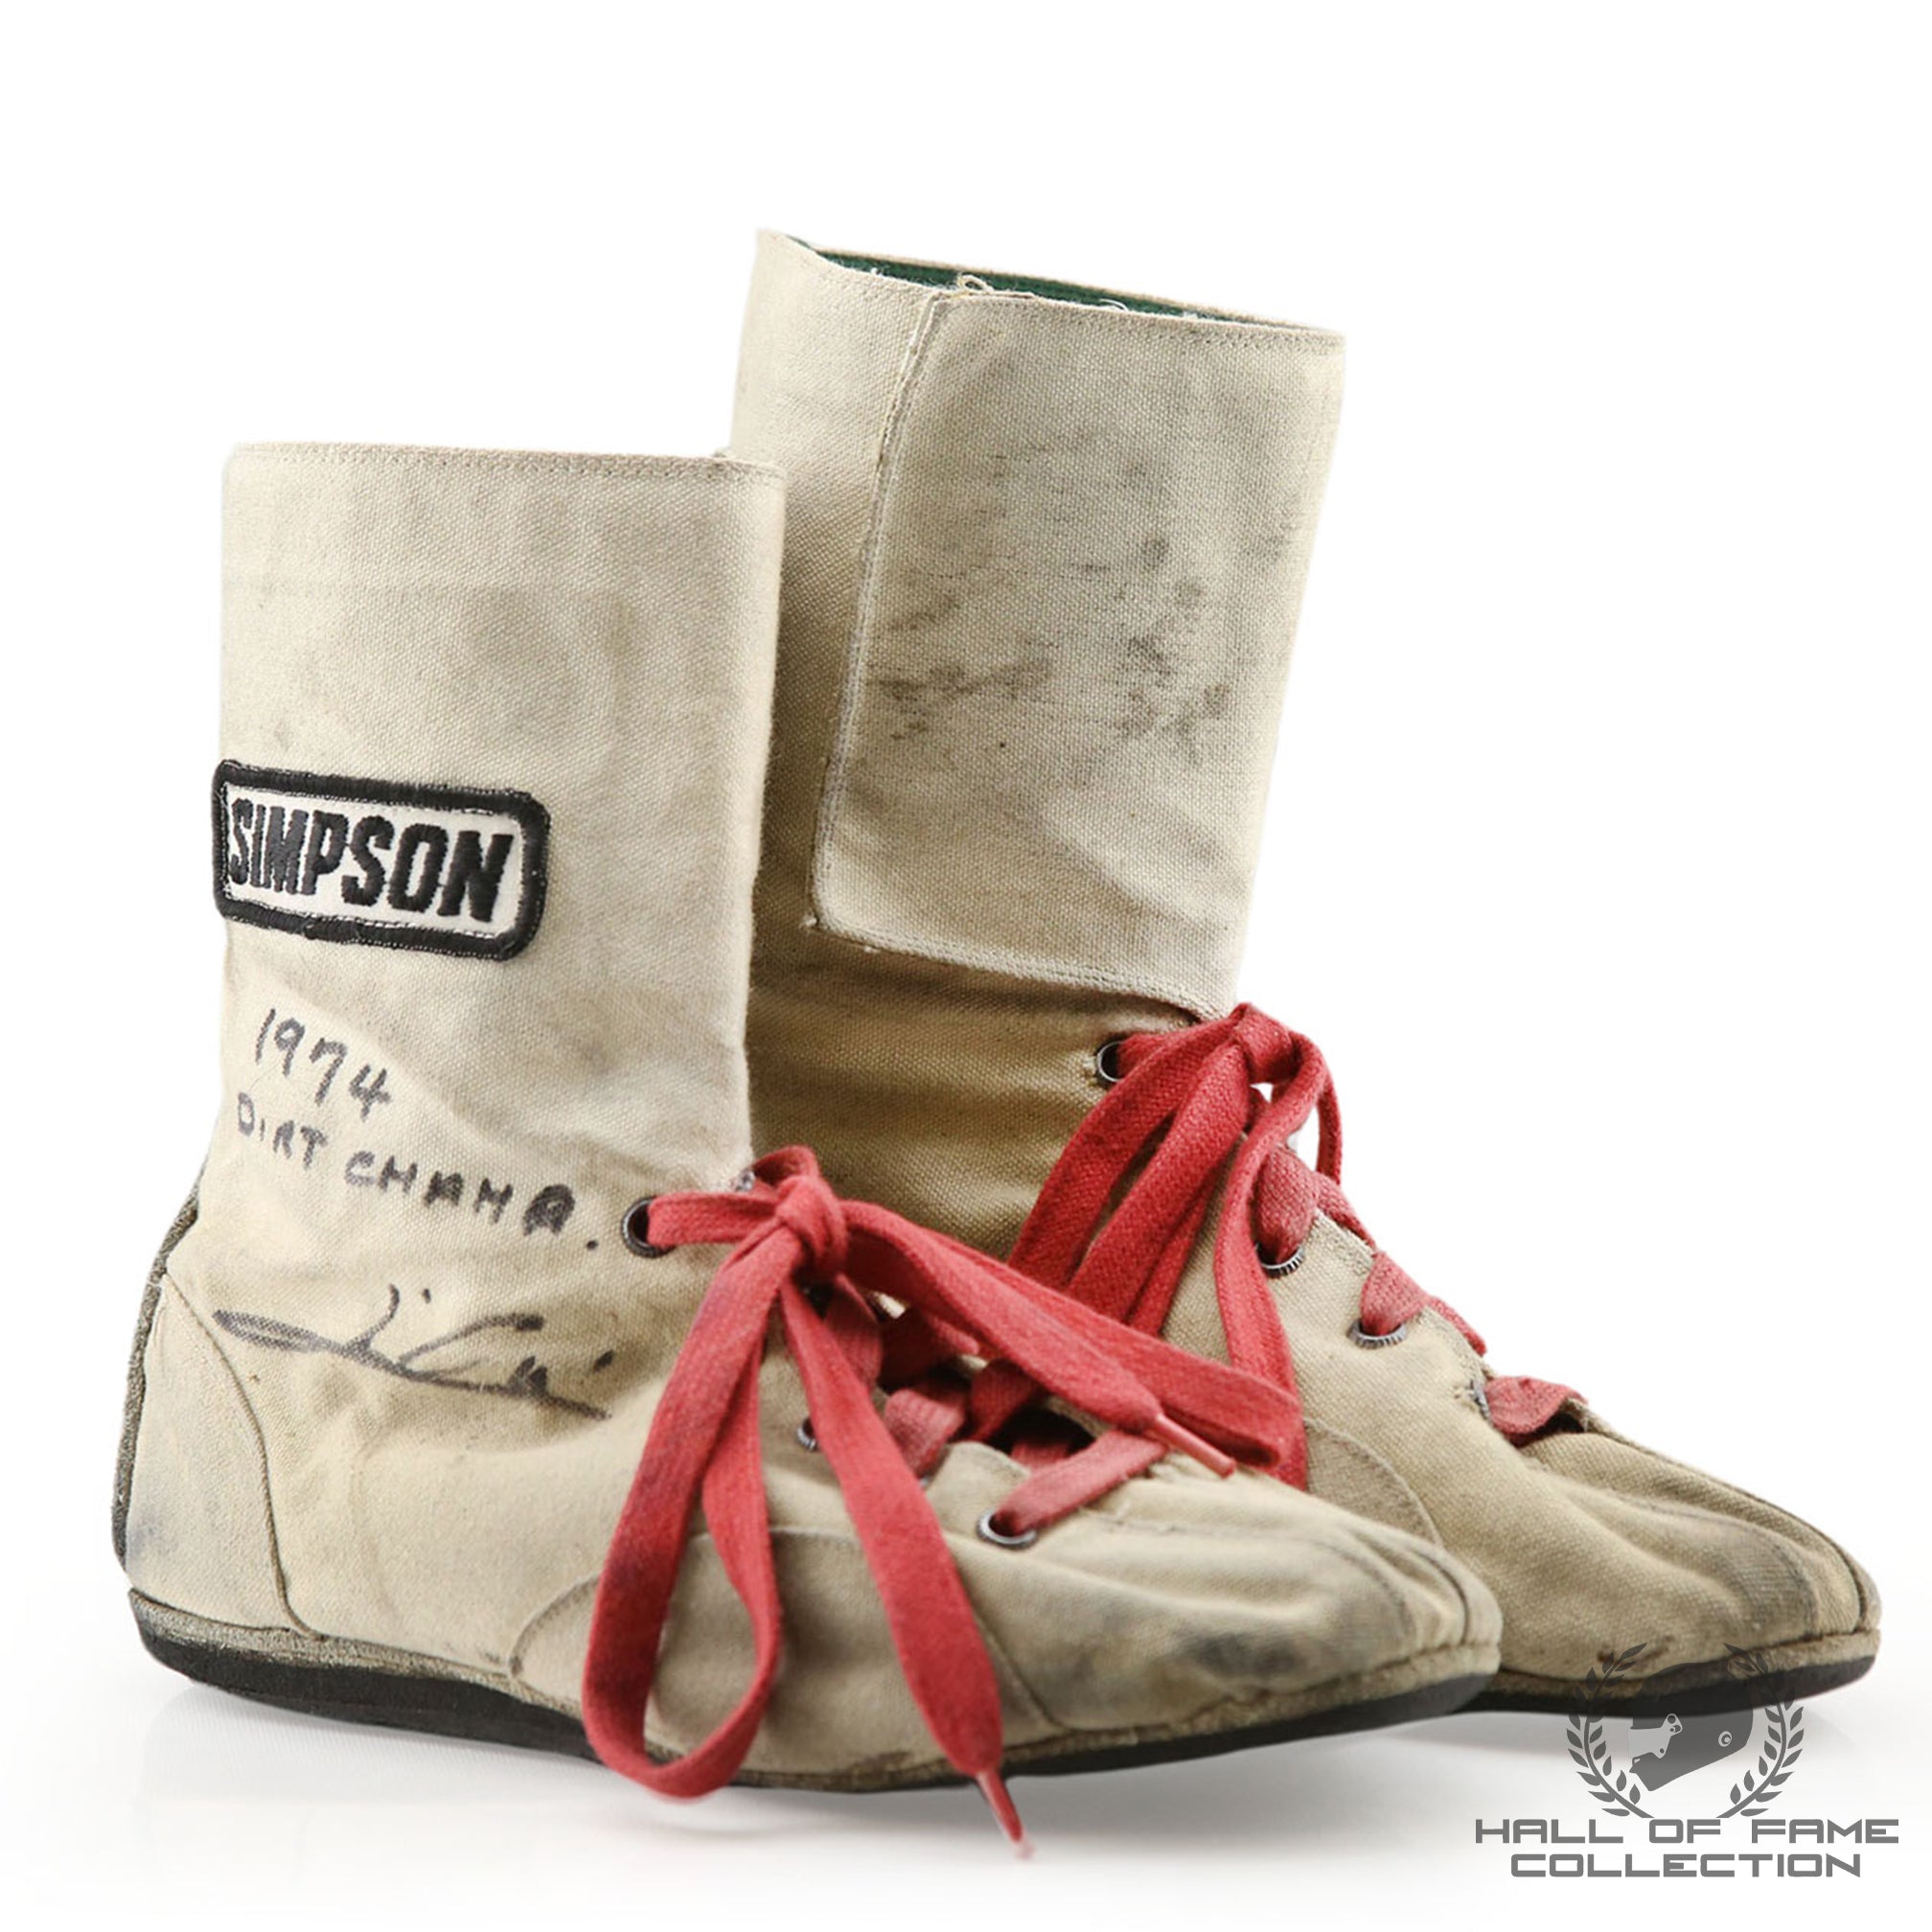 1974 Mario Andretti Signed Race Used USAC Dirt Championship Boots